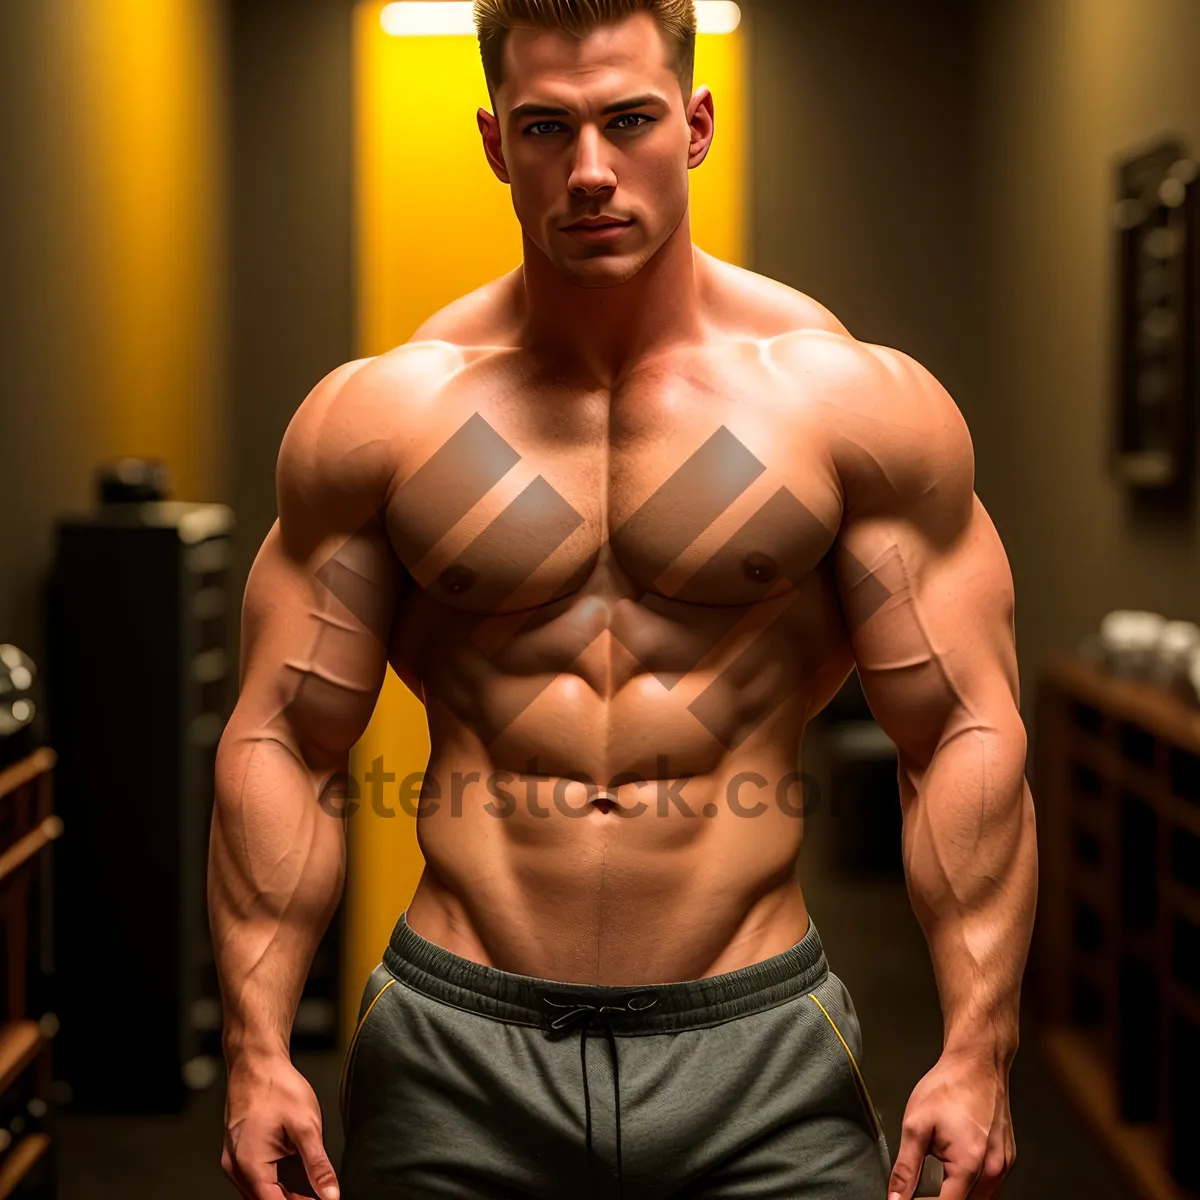 Picture of Muscled Fitness Model Posing Shirtless in Gym